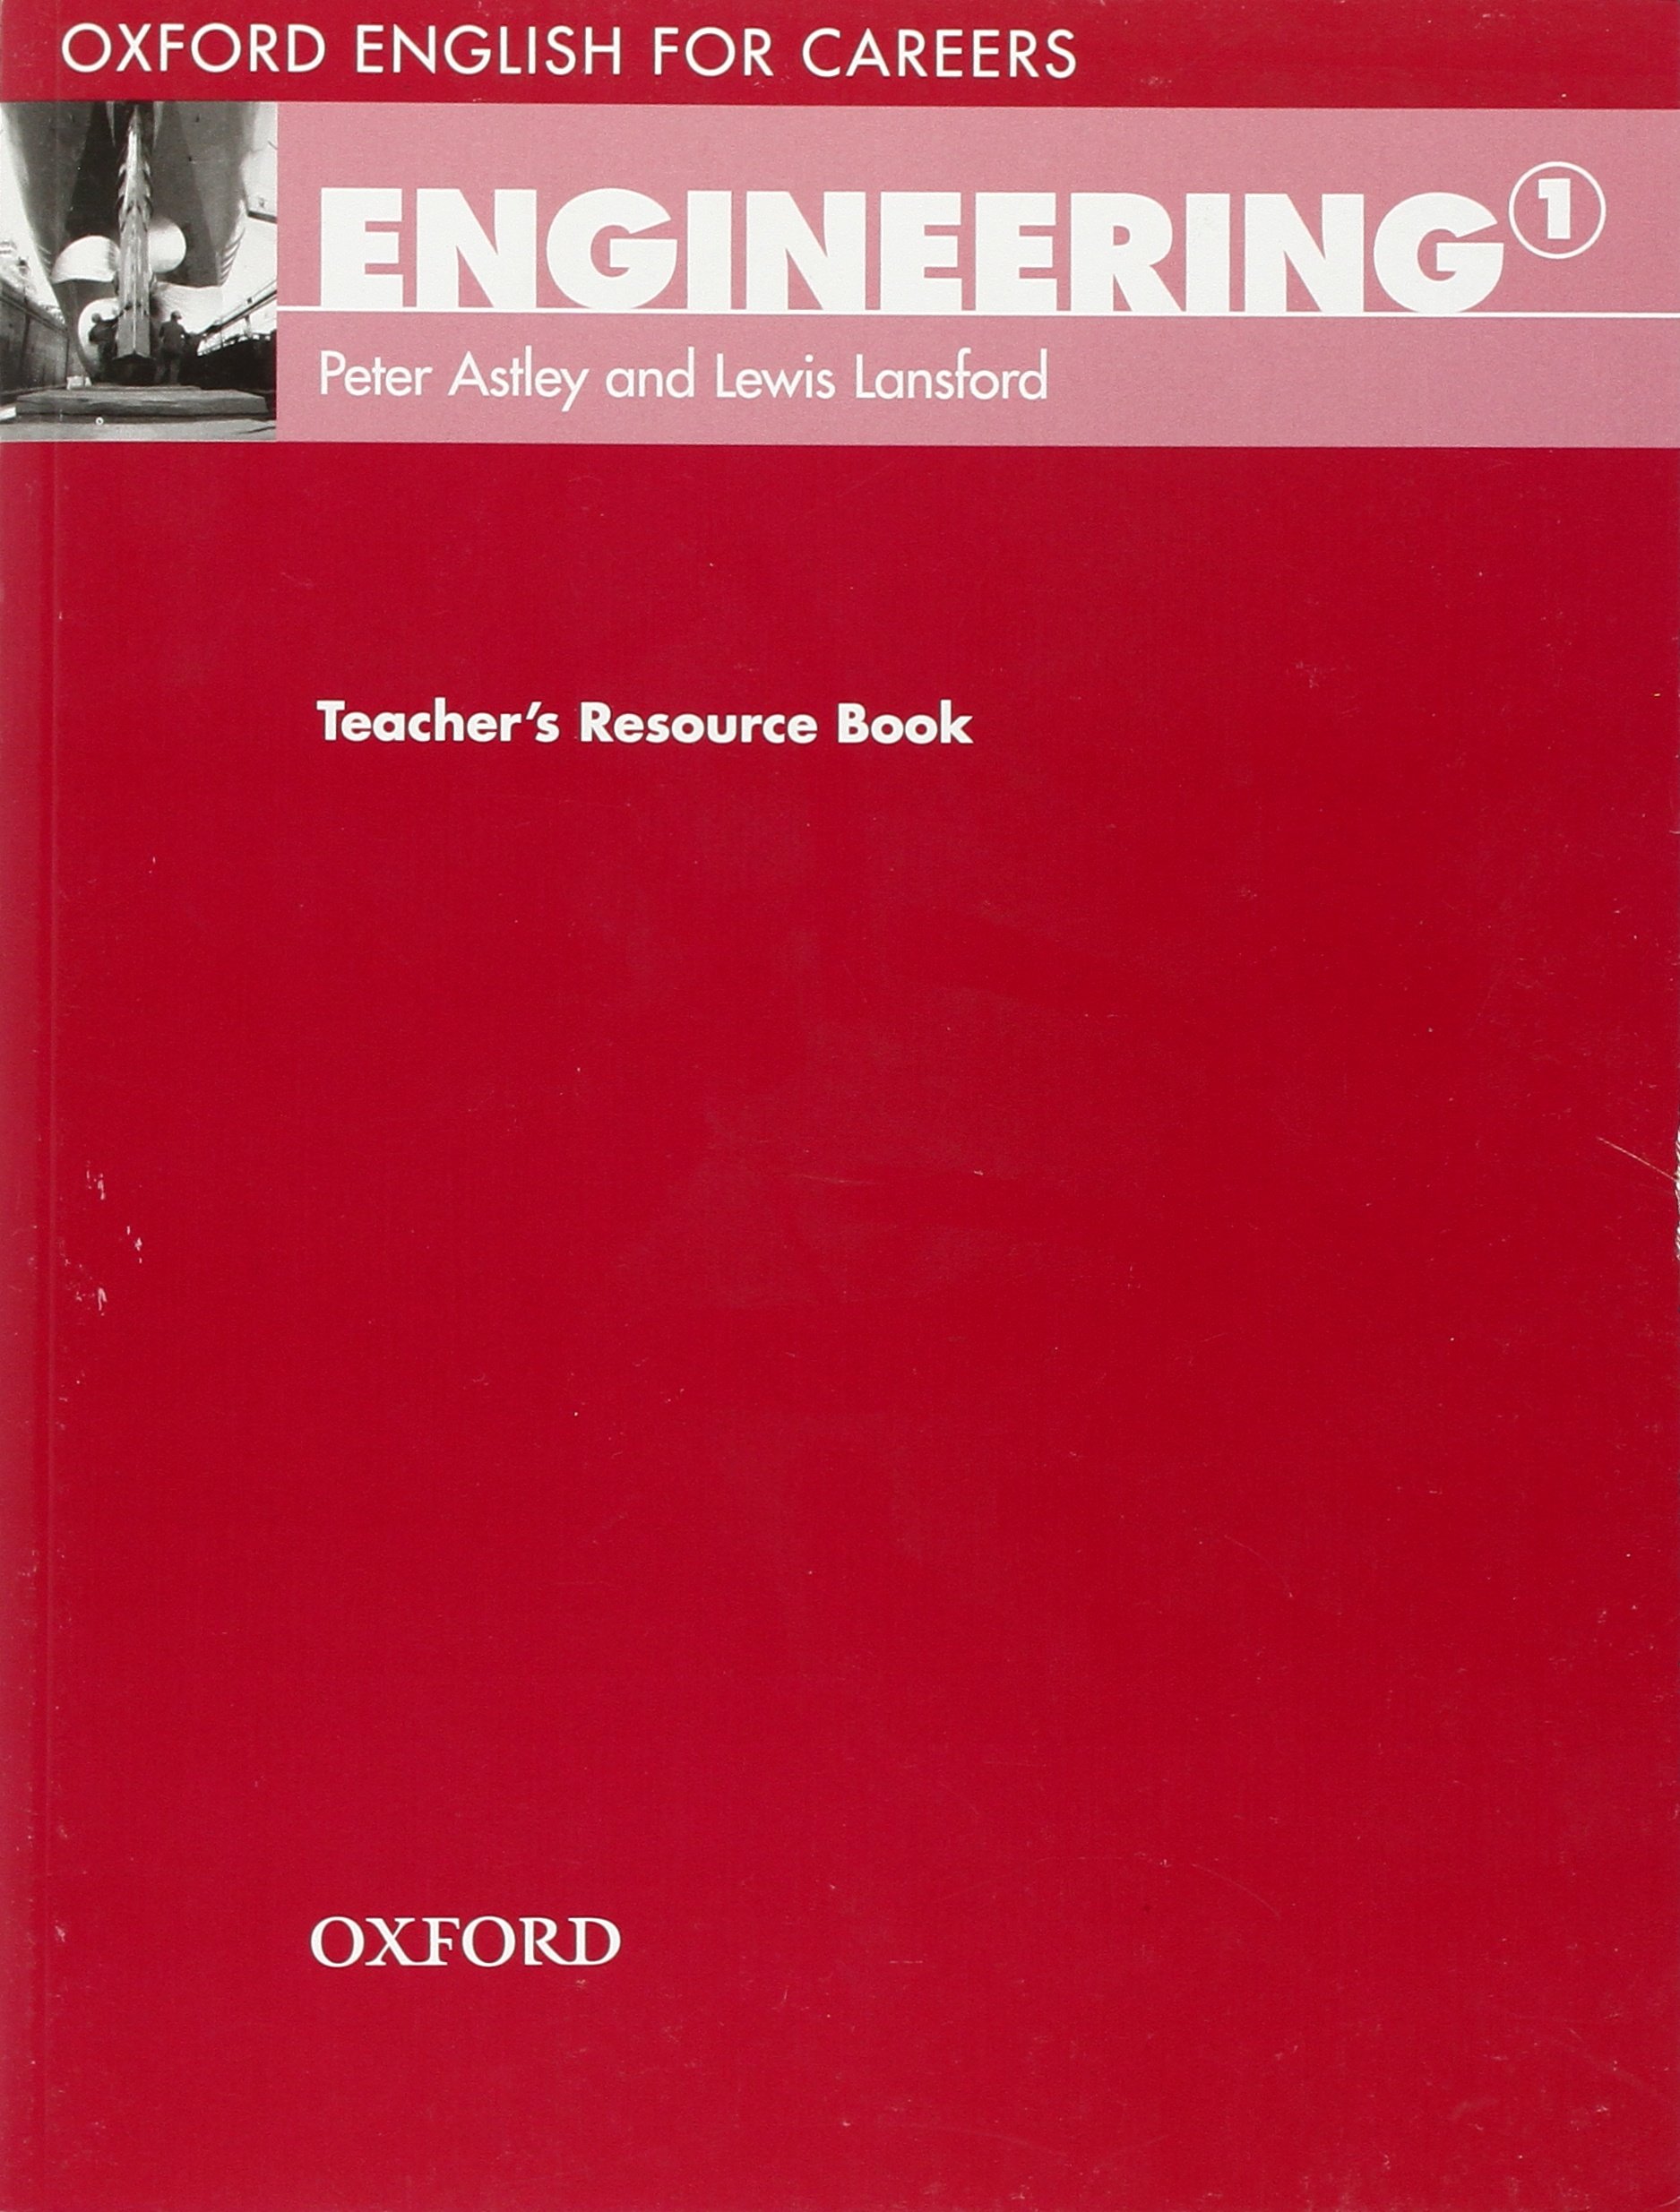 ENGINEERING (OXFORD ENGLISH FOR CAREERS) 1 Teacher's Resource Book